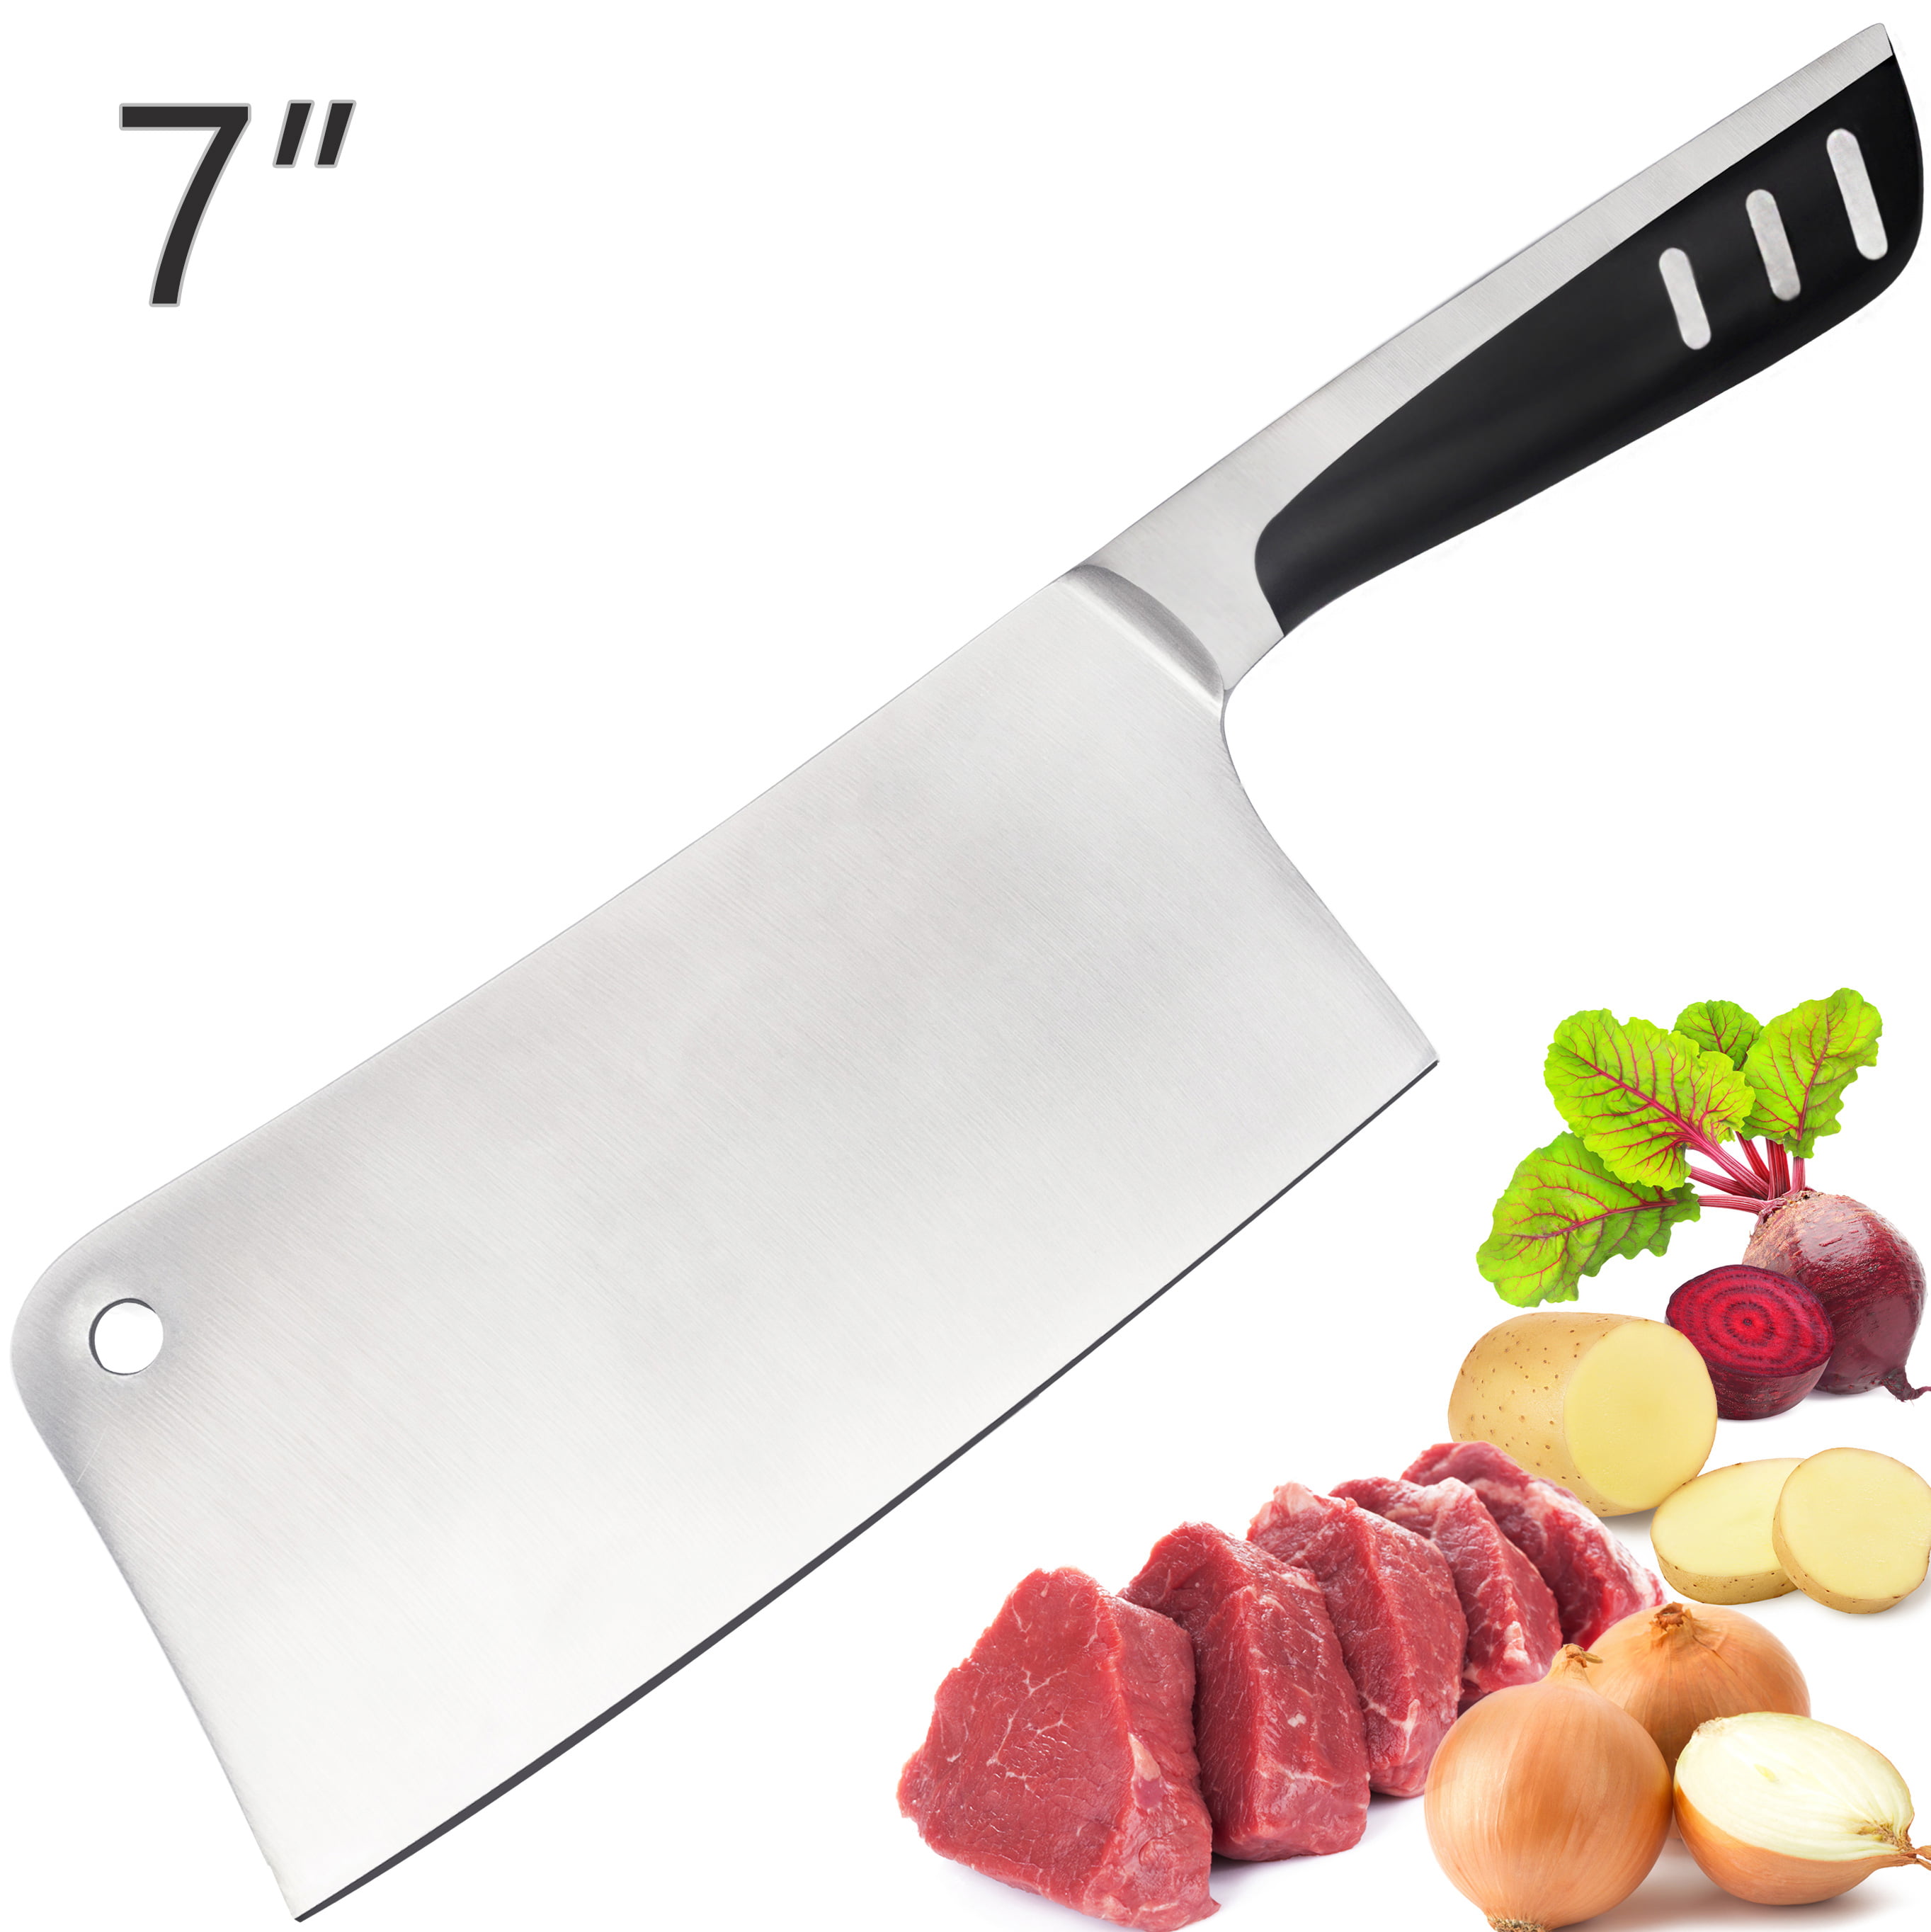 Butcher Knife Stainless Steel 7 Inch Multi Purpose Best For Home